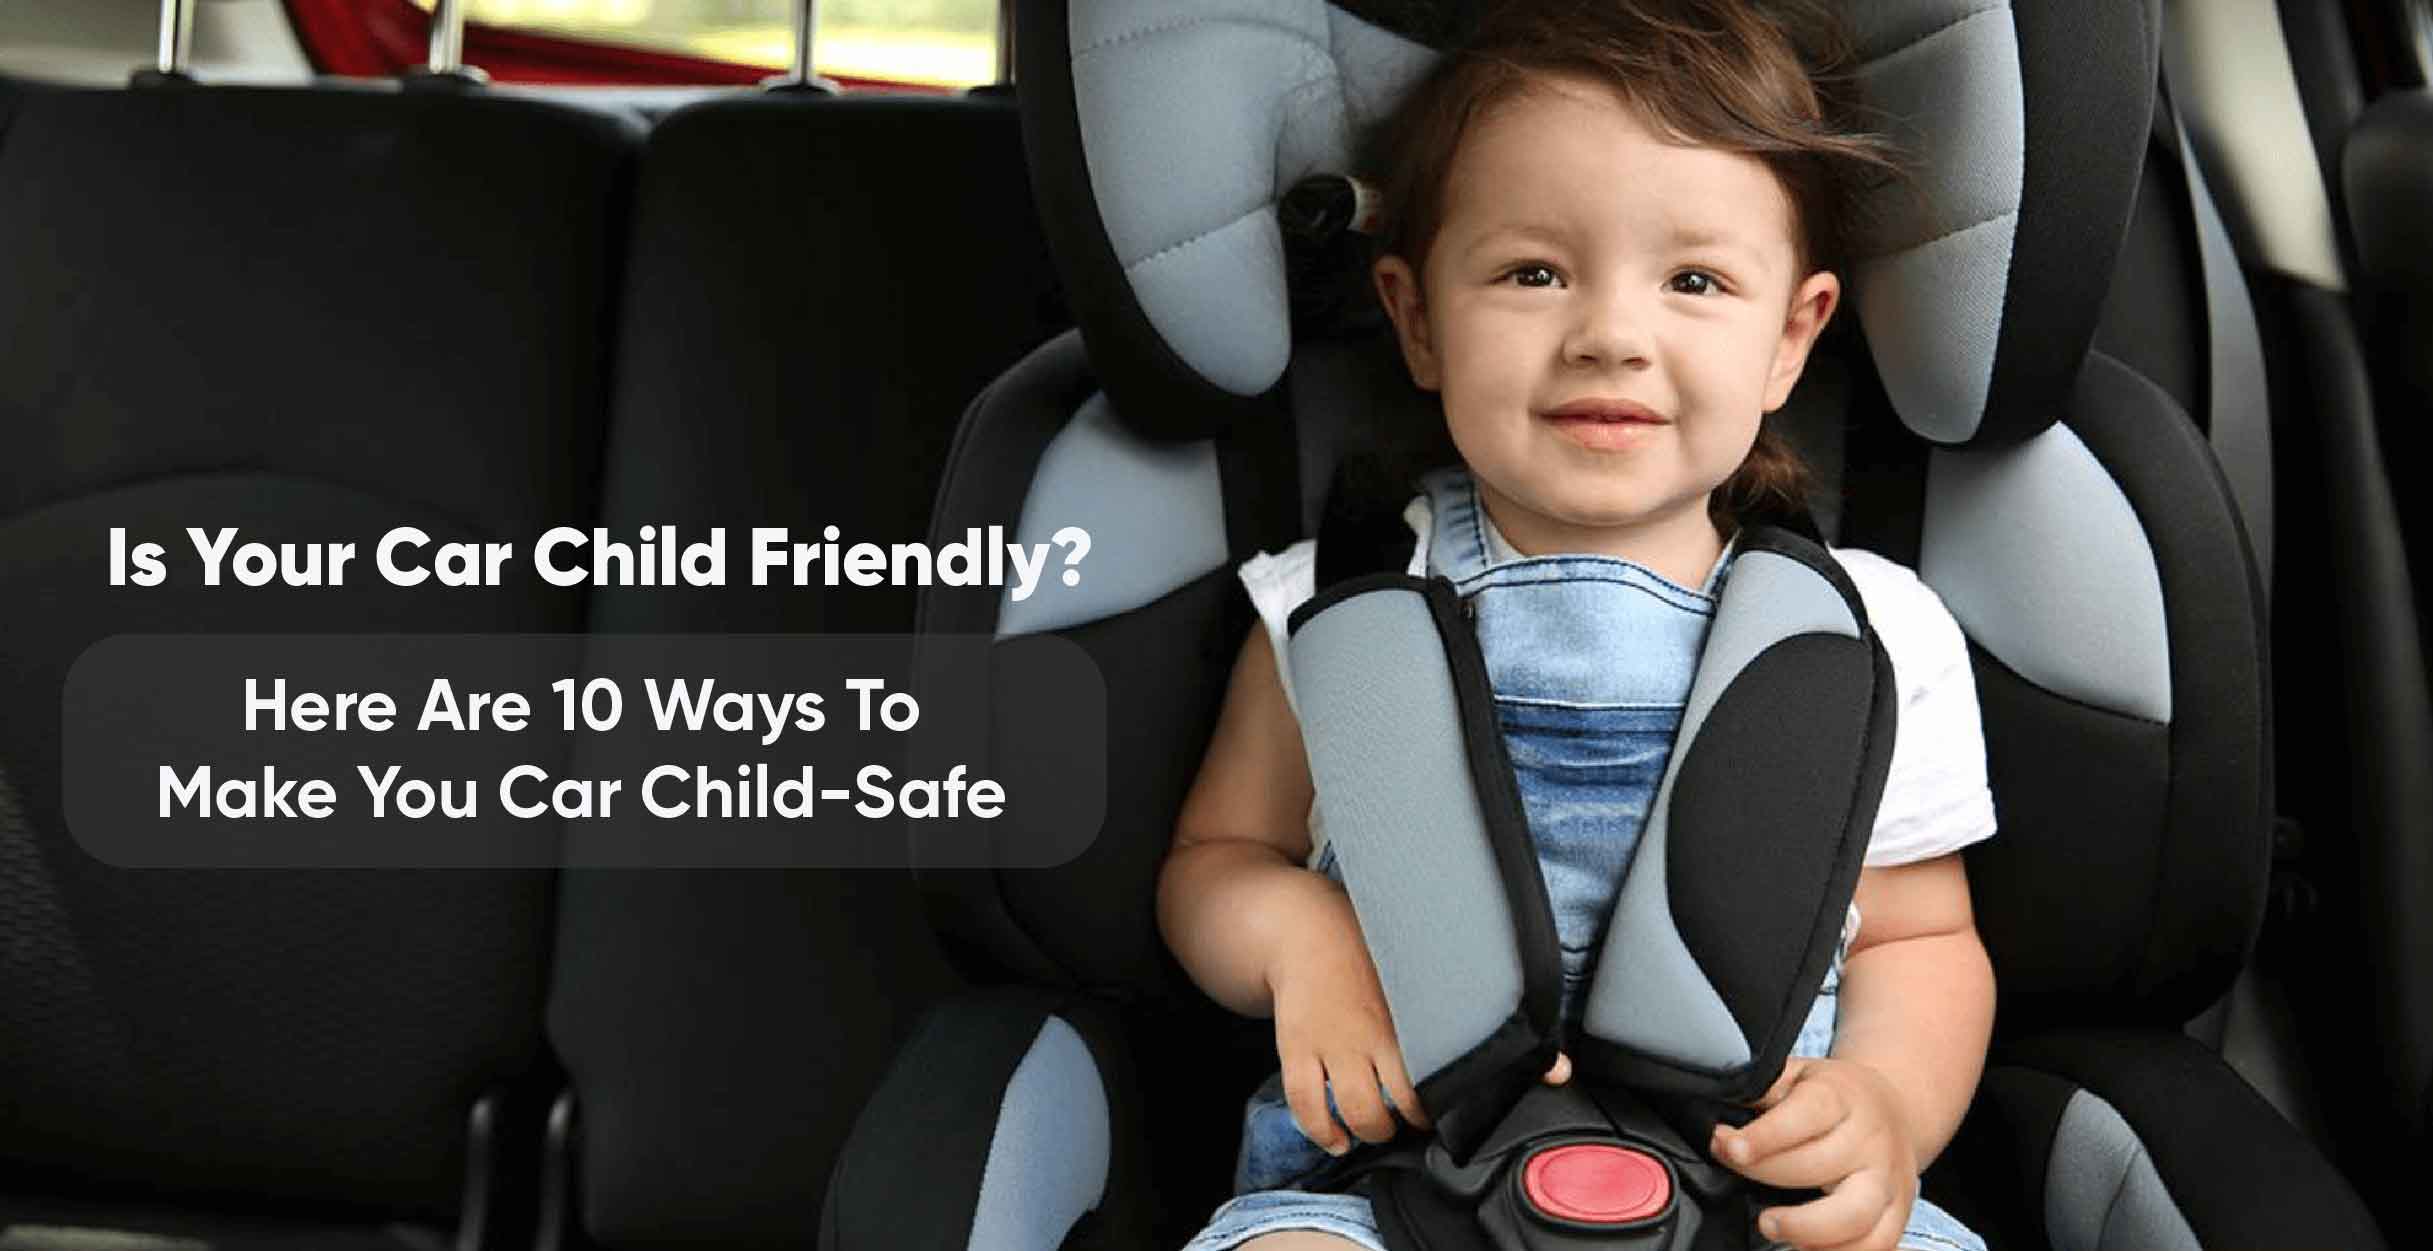 Child Resistant Does Not Mean Childproof